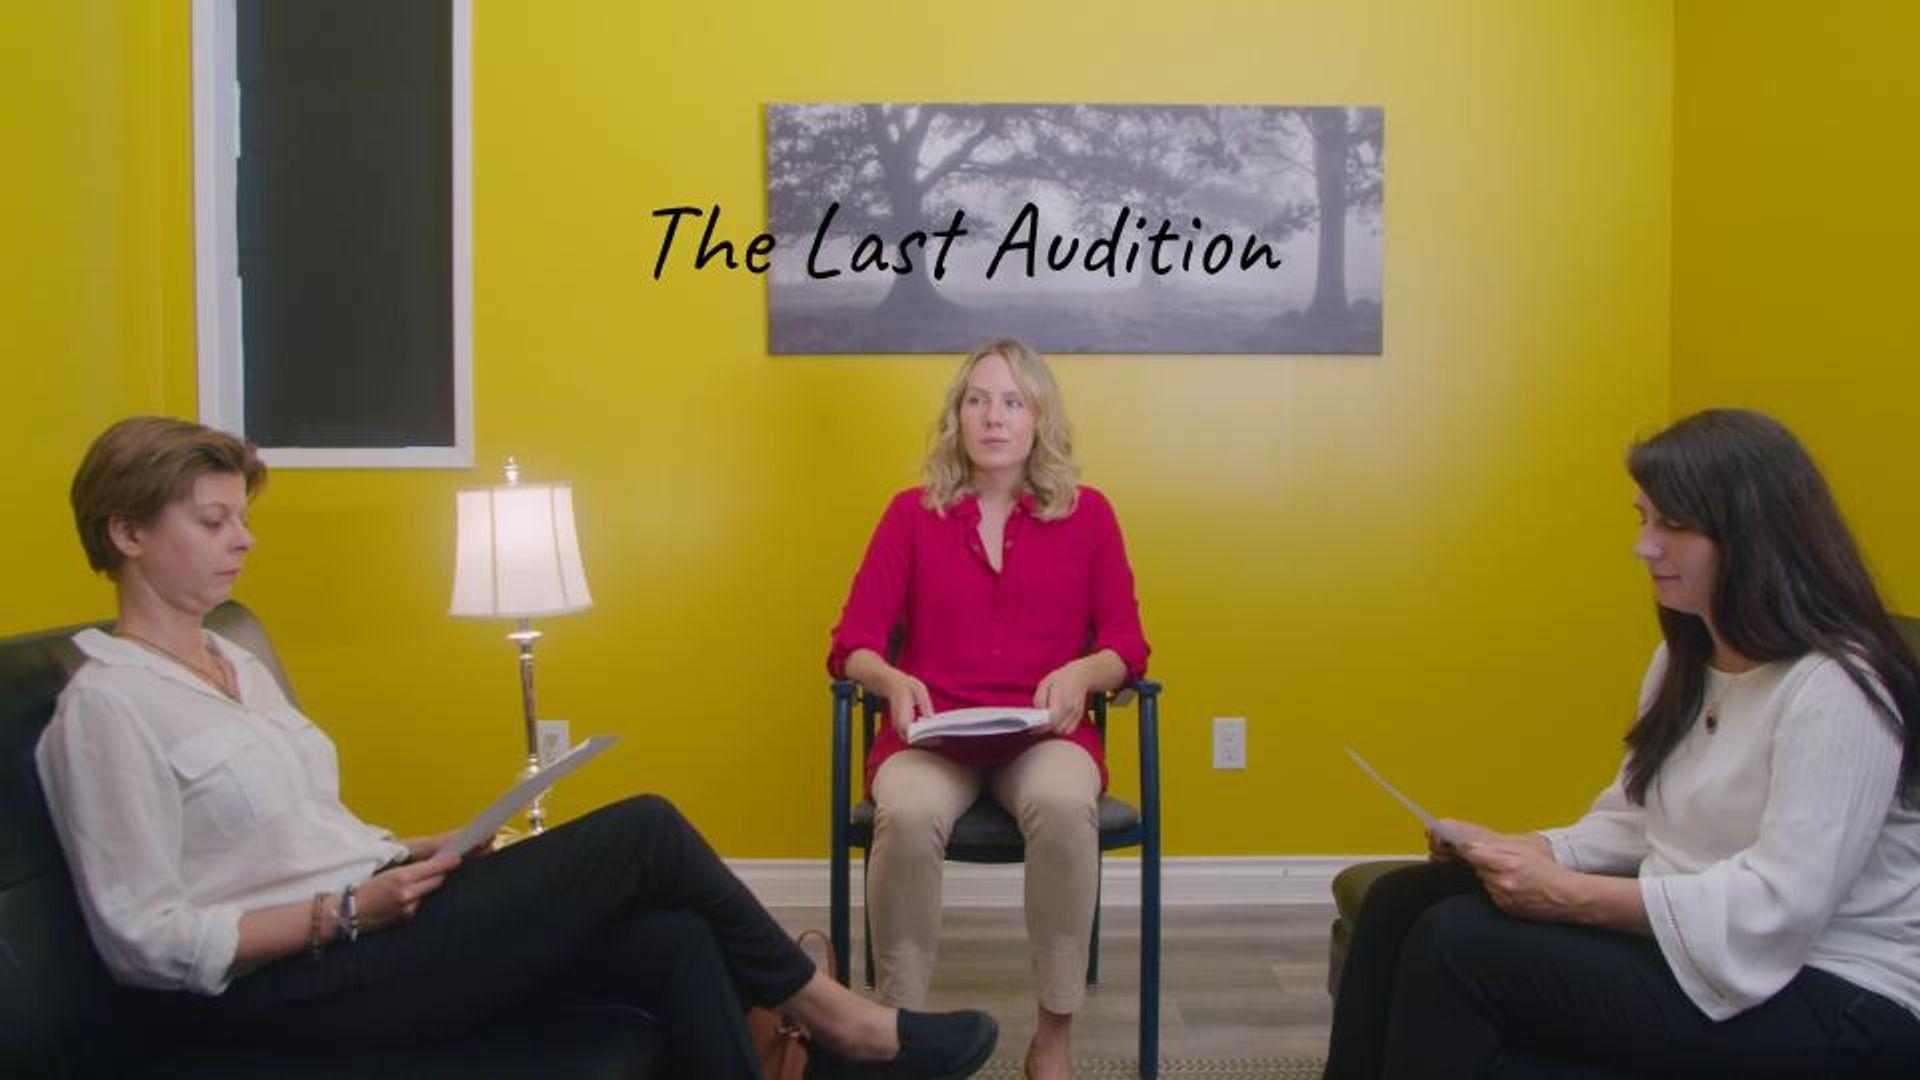 The Last Audition